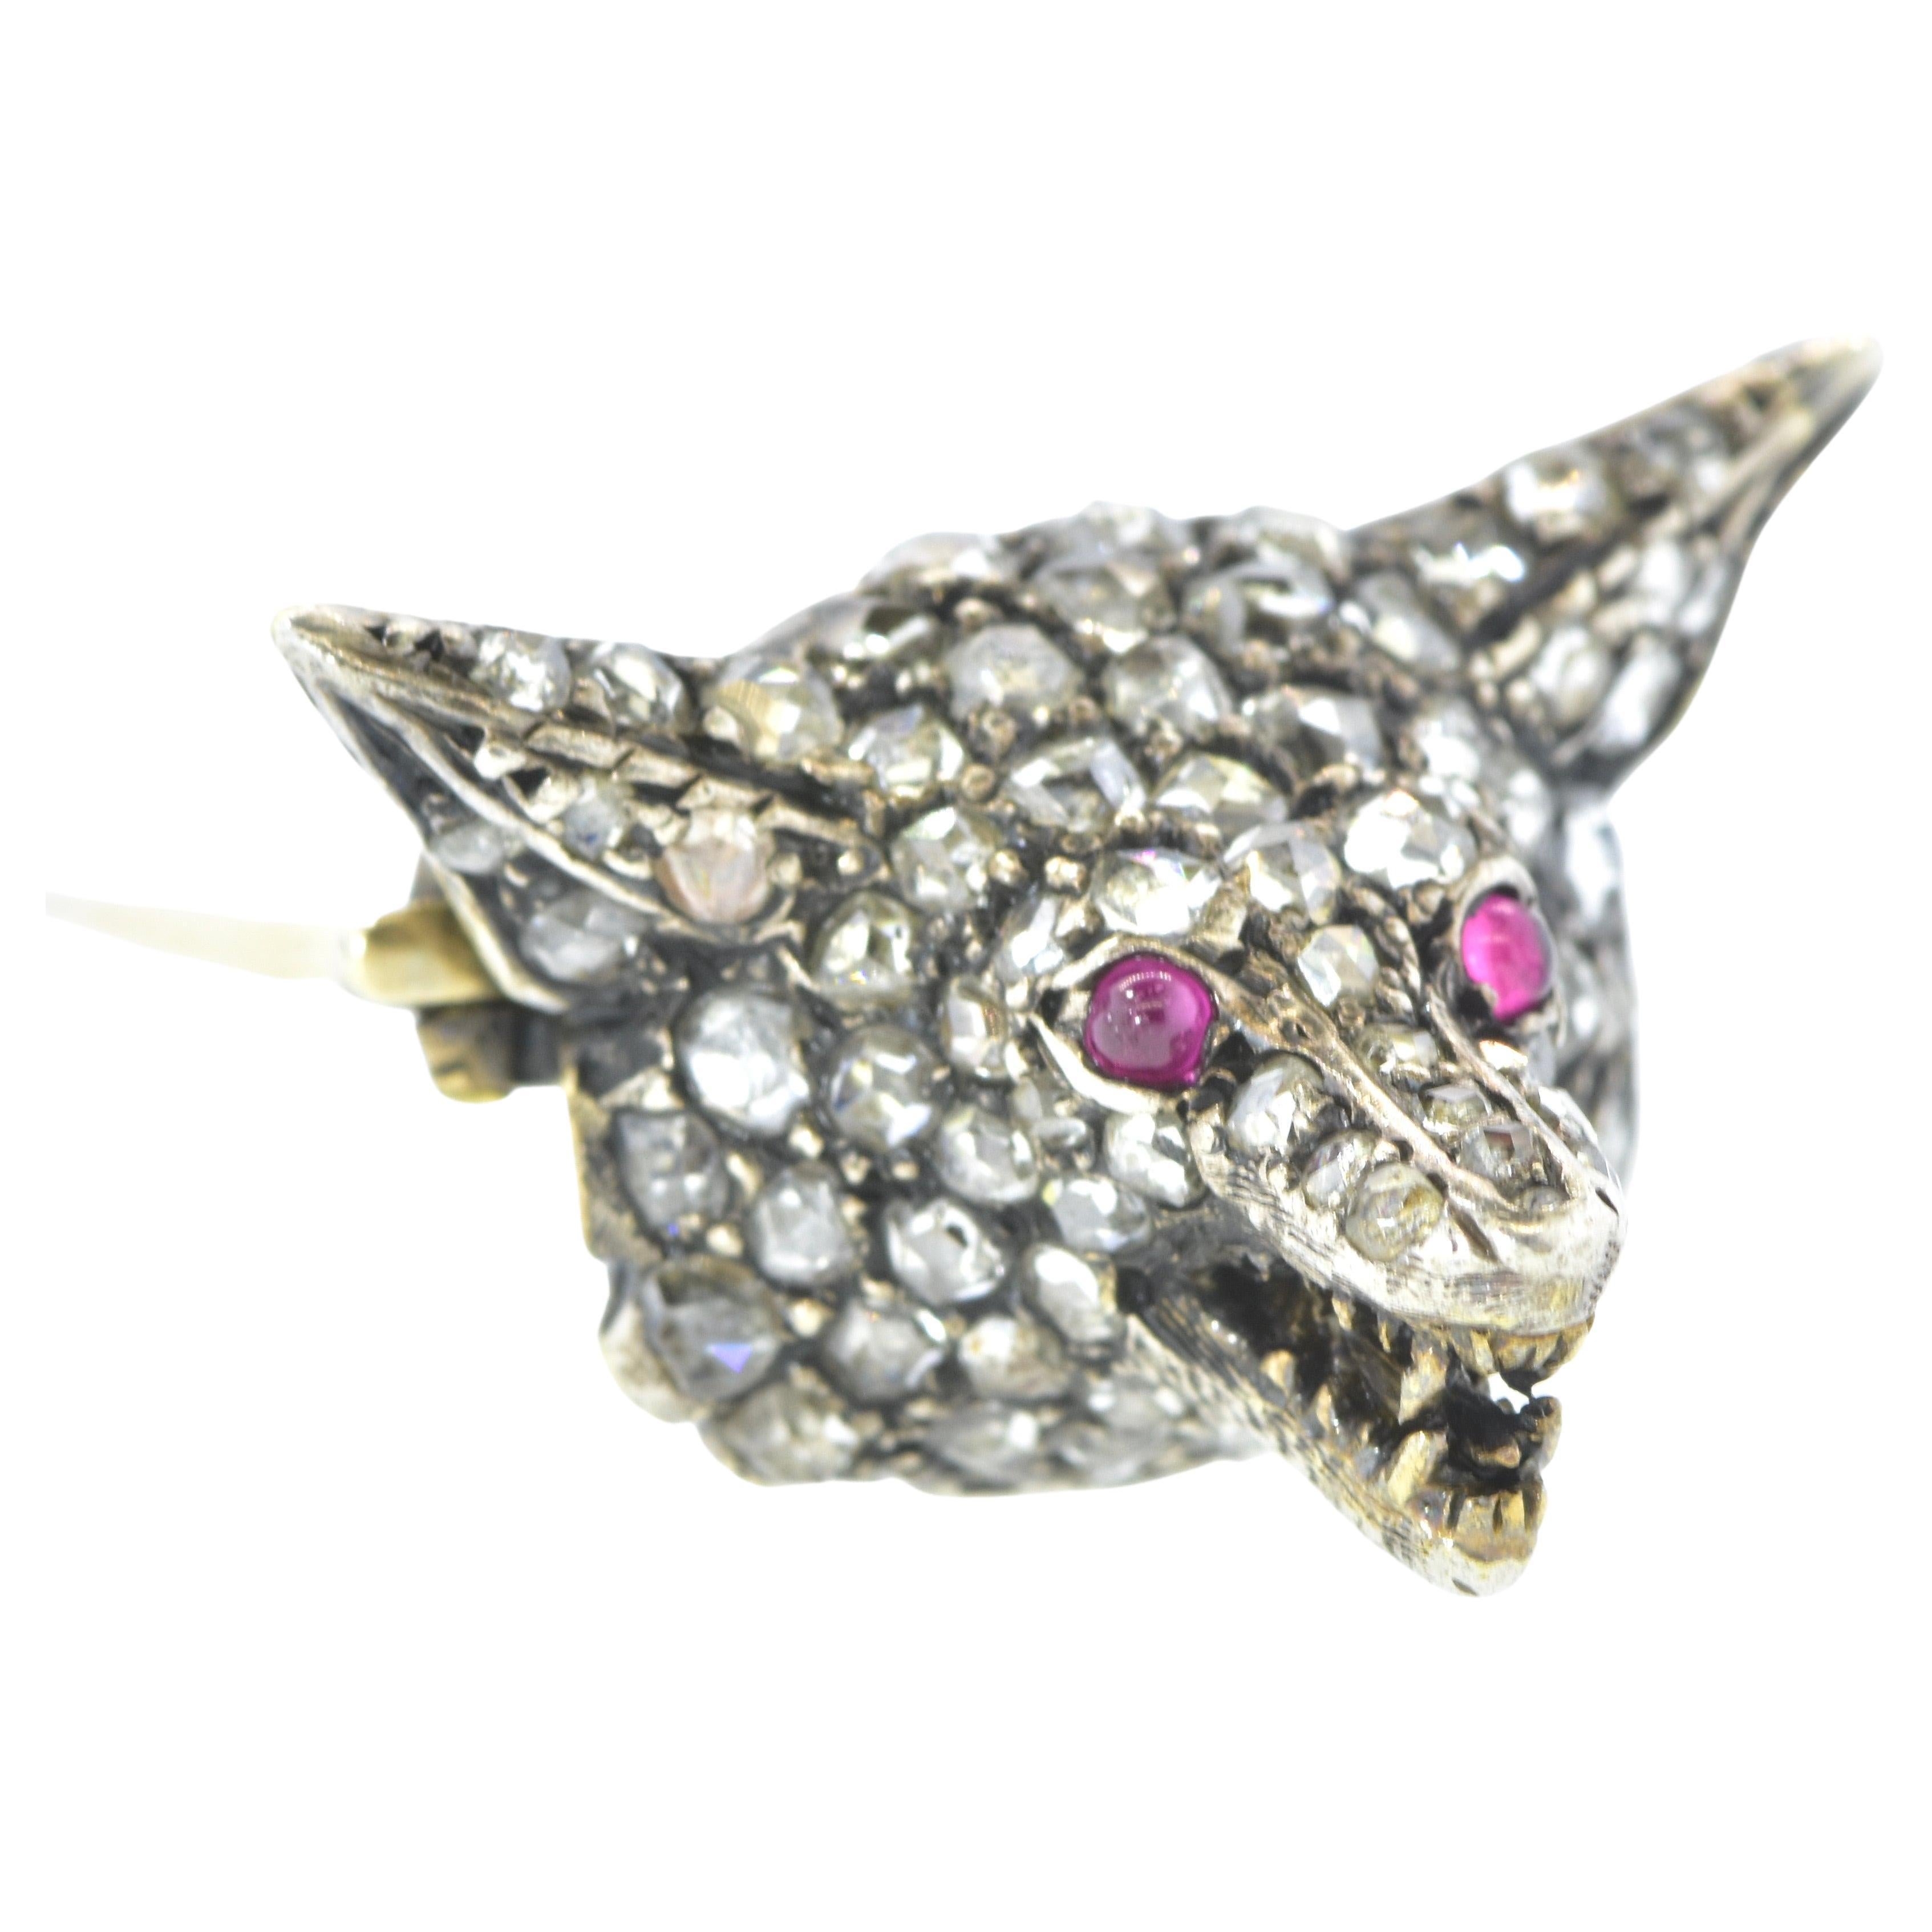 Antique rose cut diamond brooch of a fox head.  A fox for all Seasons!  Nearly 80 rose cut diamonds (about 1 ct.), a pair of small cabochon Burma rubies and both silver and gold (on the back) are employed to create a tour de force of personality and